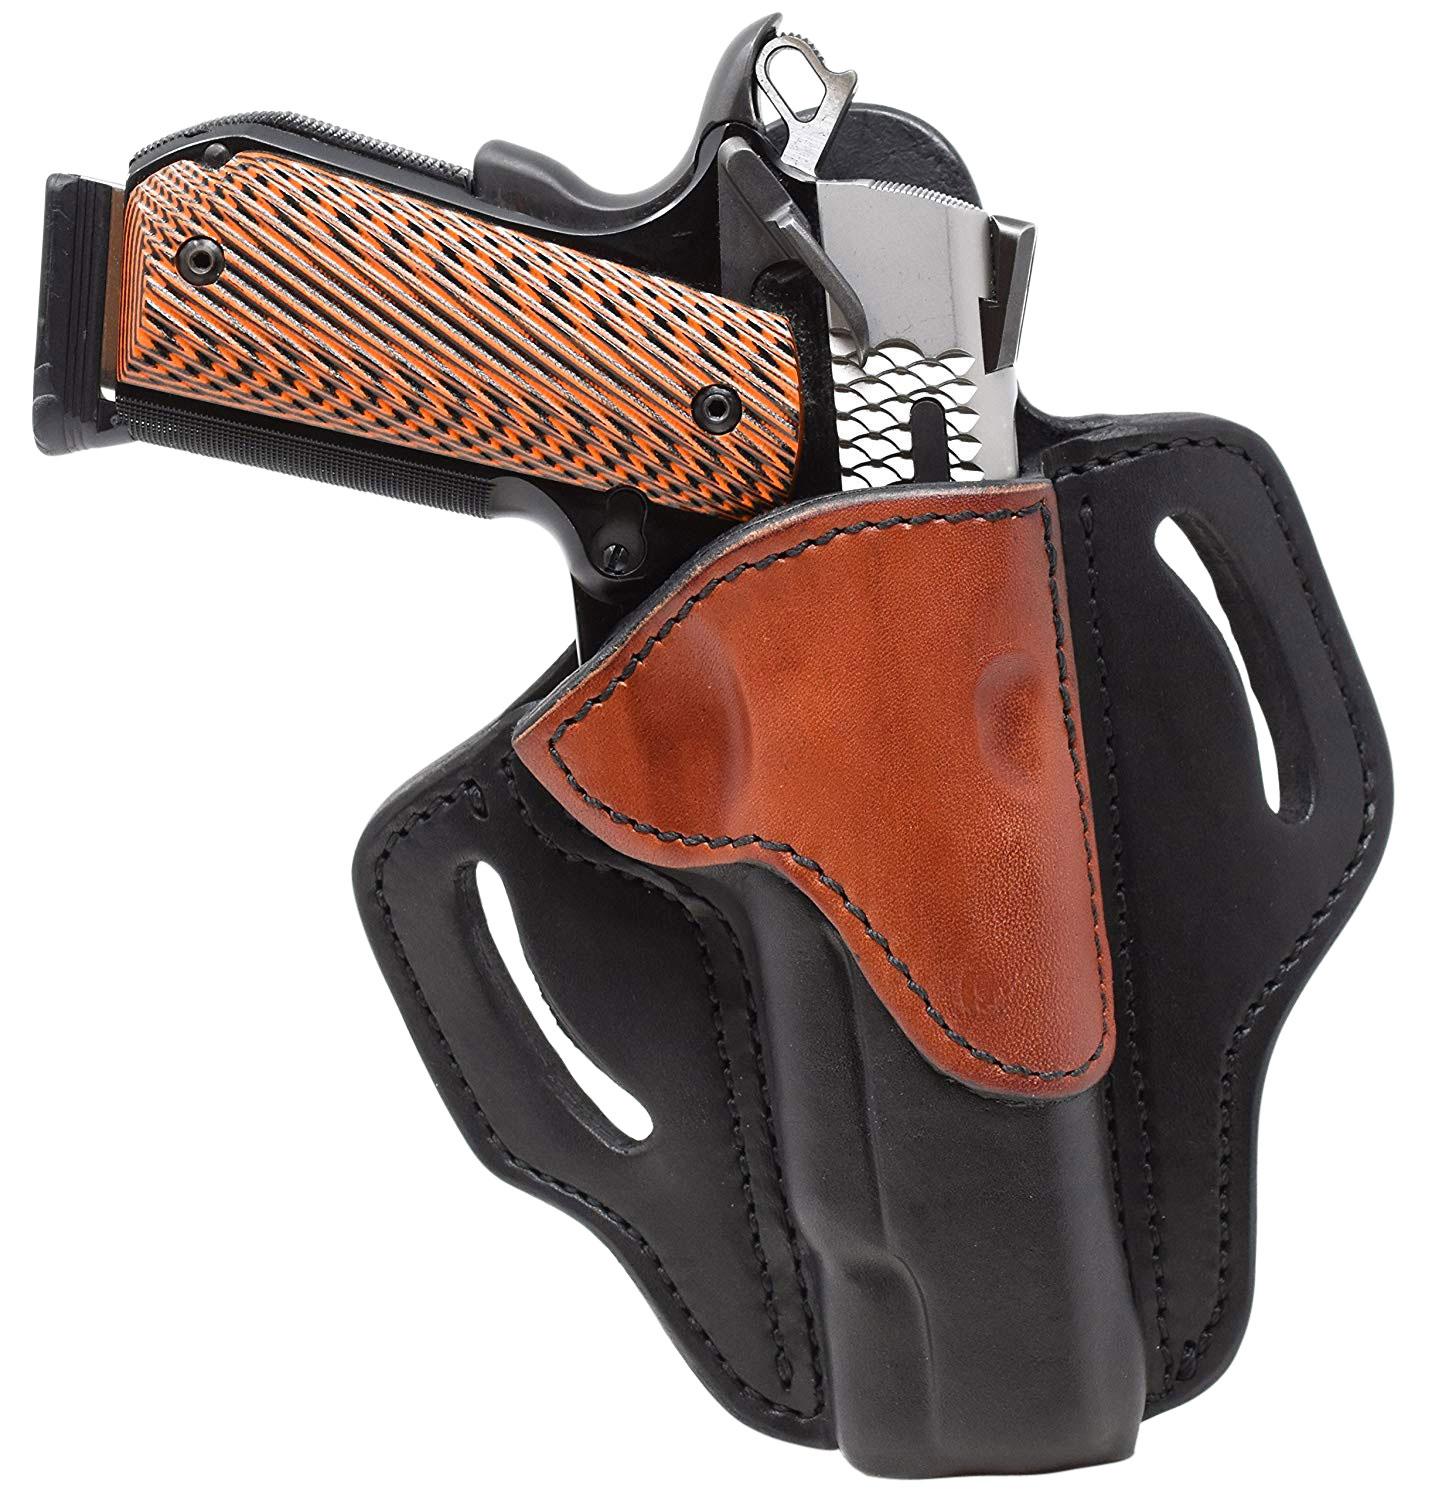  Bh1 Holster Right Hand One Size